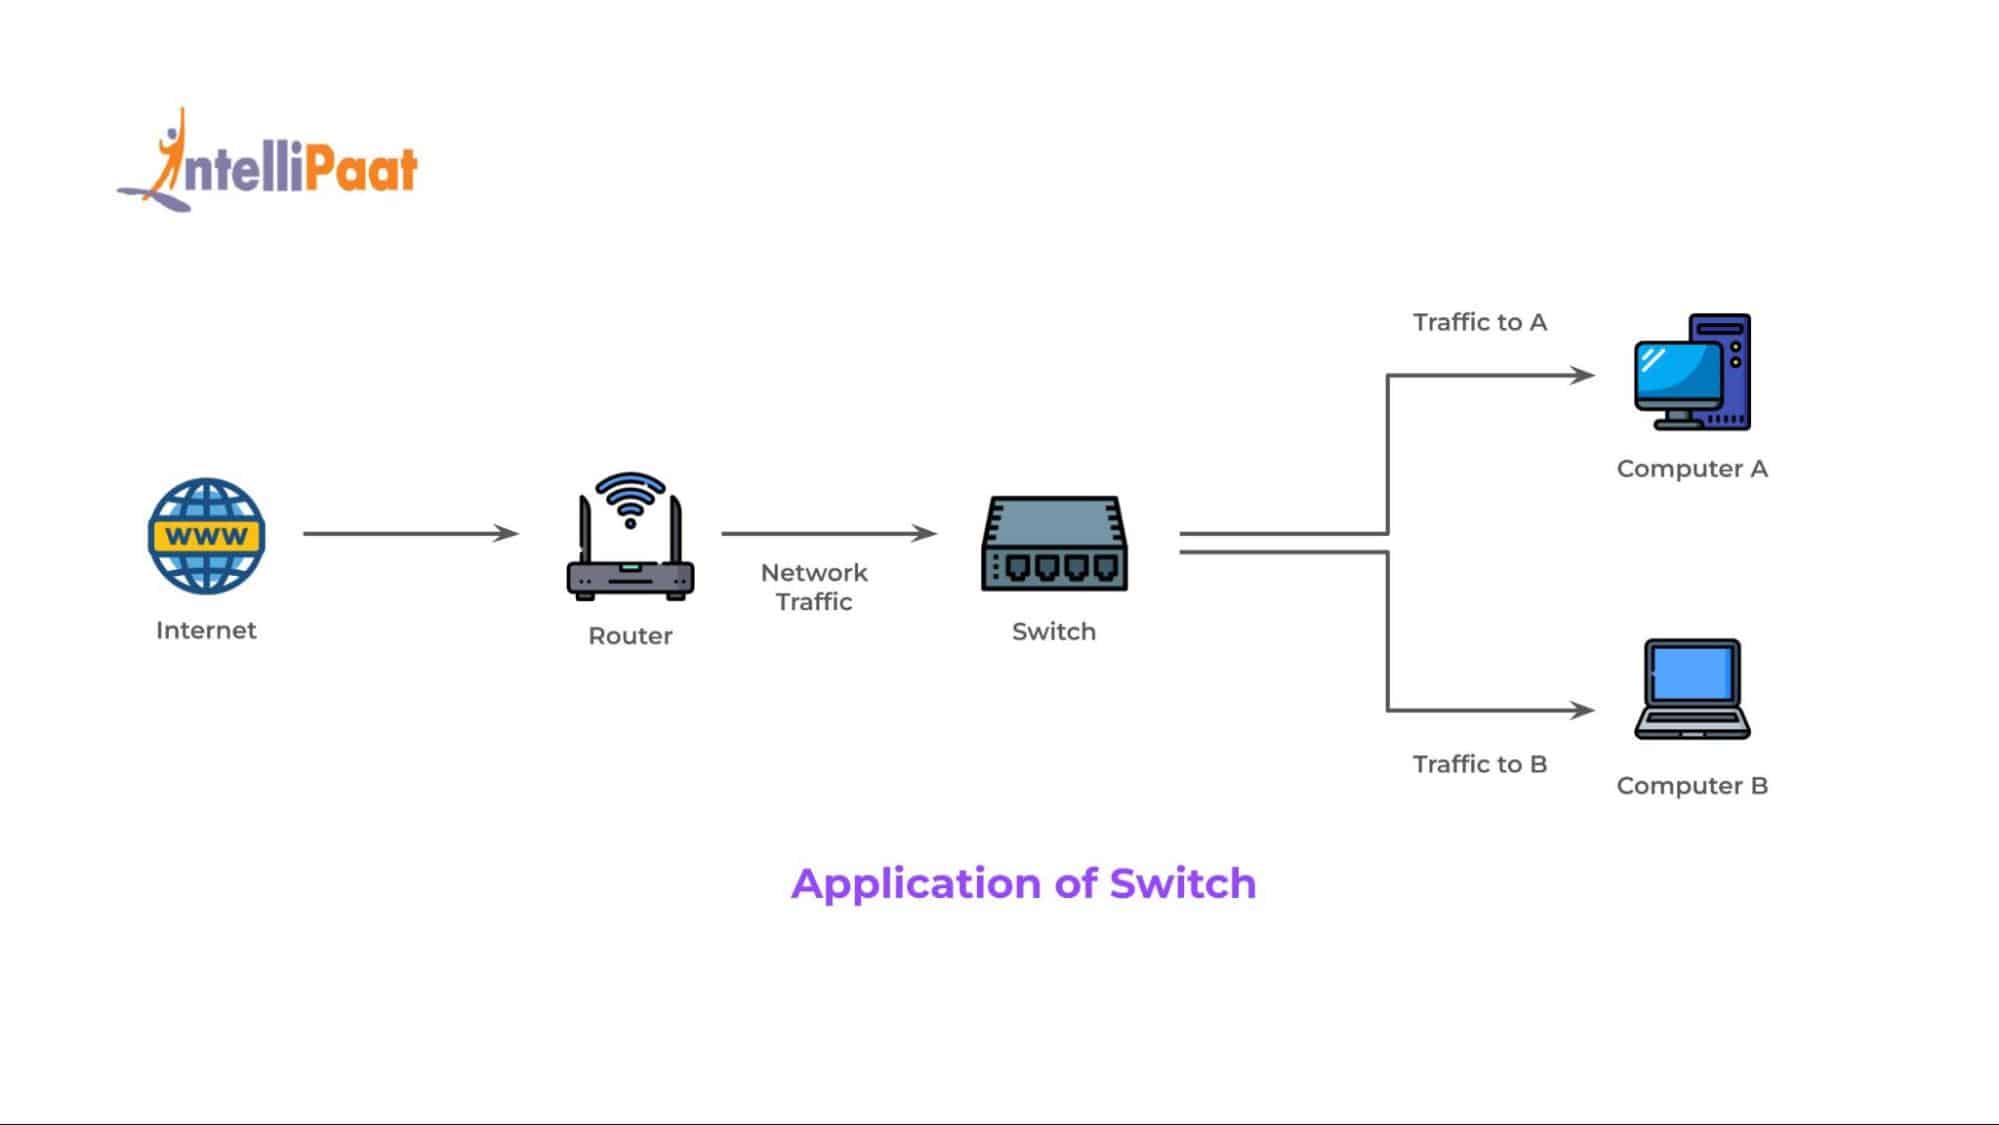 Applications of Switch